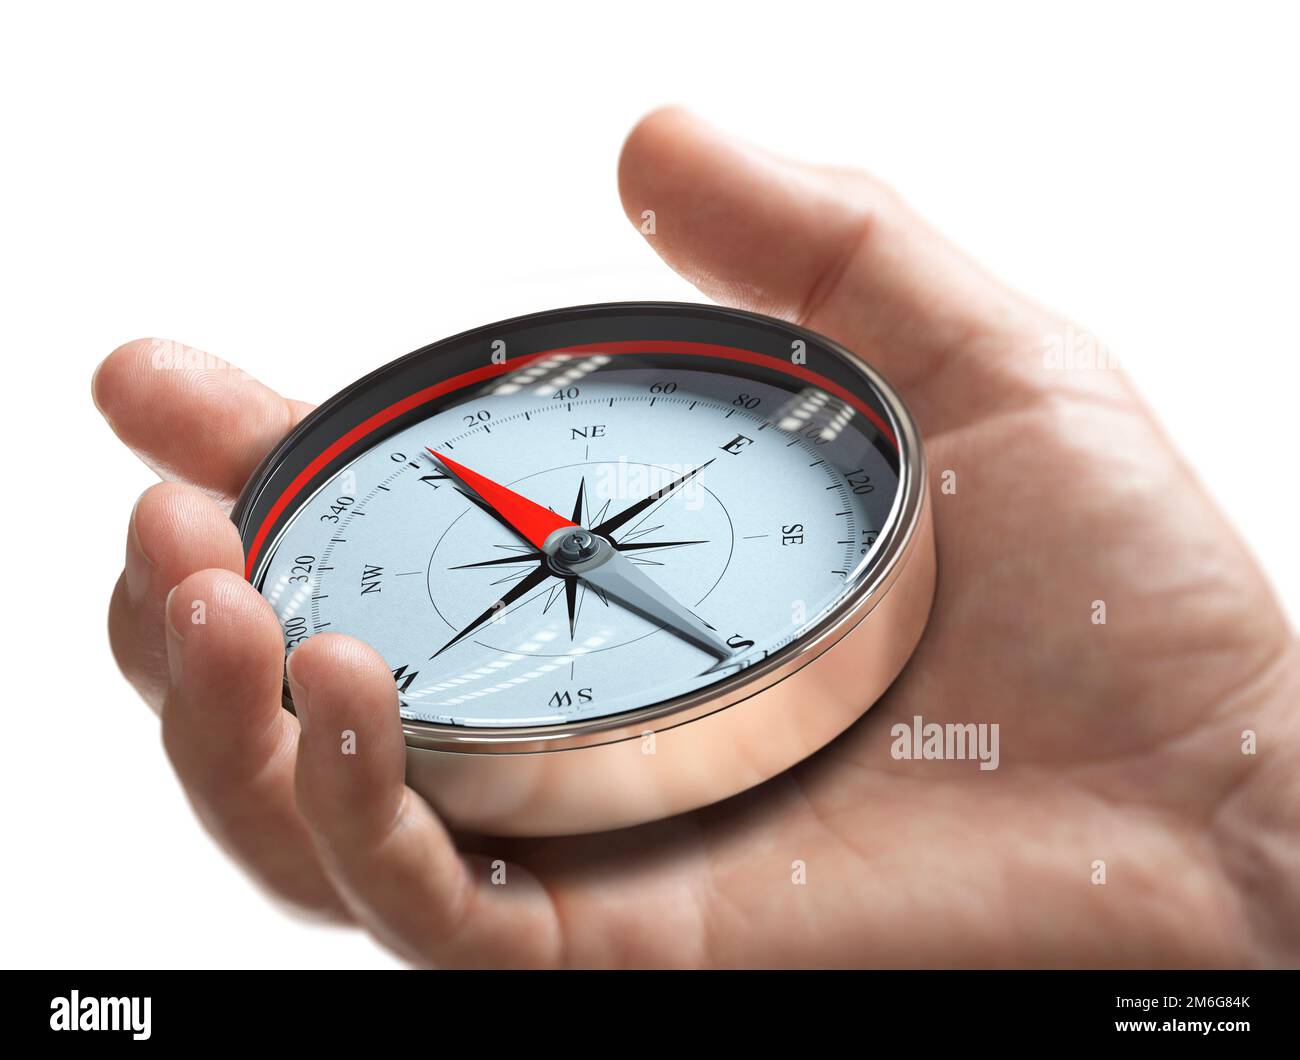 Hand holding a compass over white background. Strategic orientation or direction concept. Stock Photo